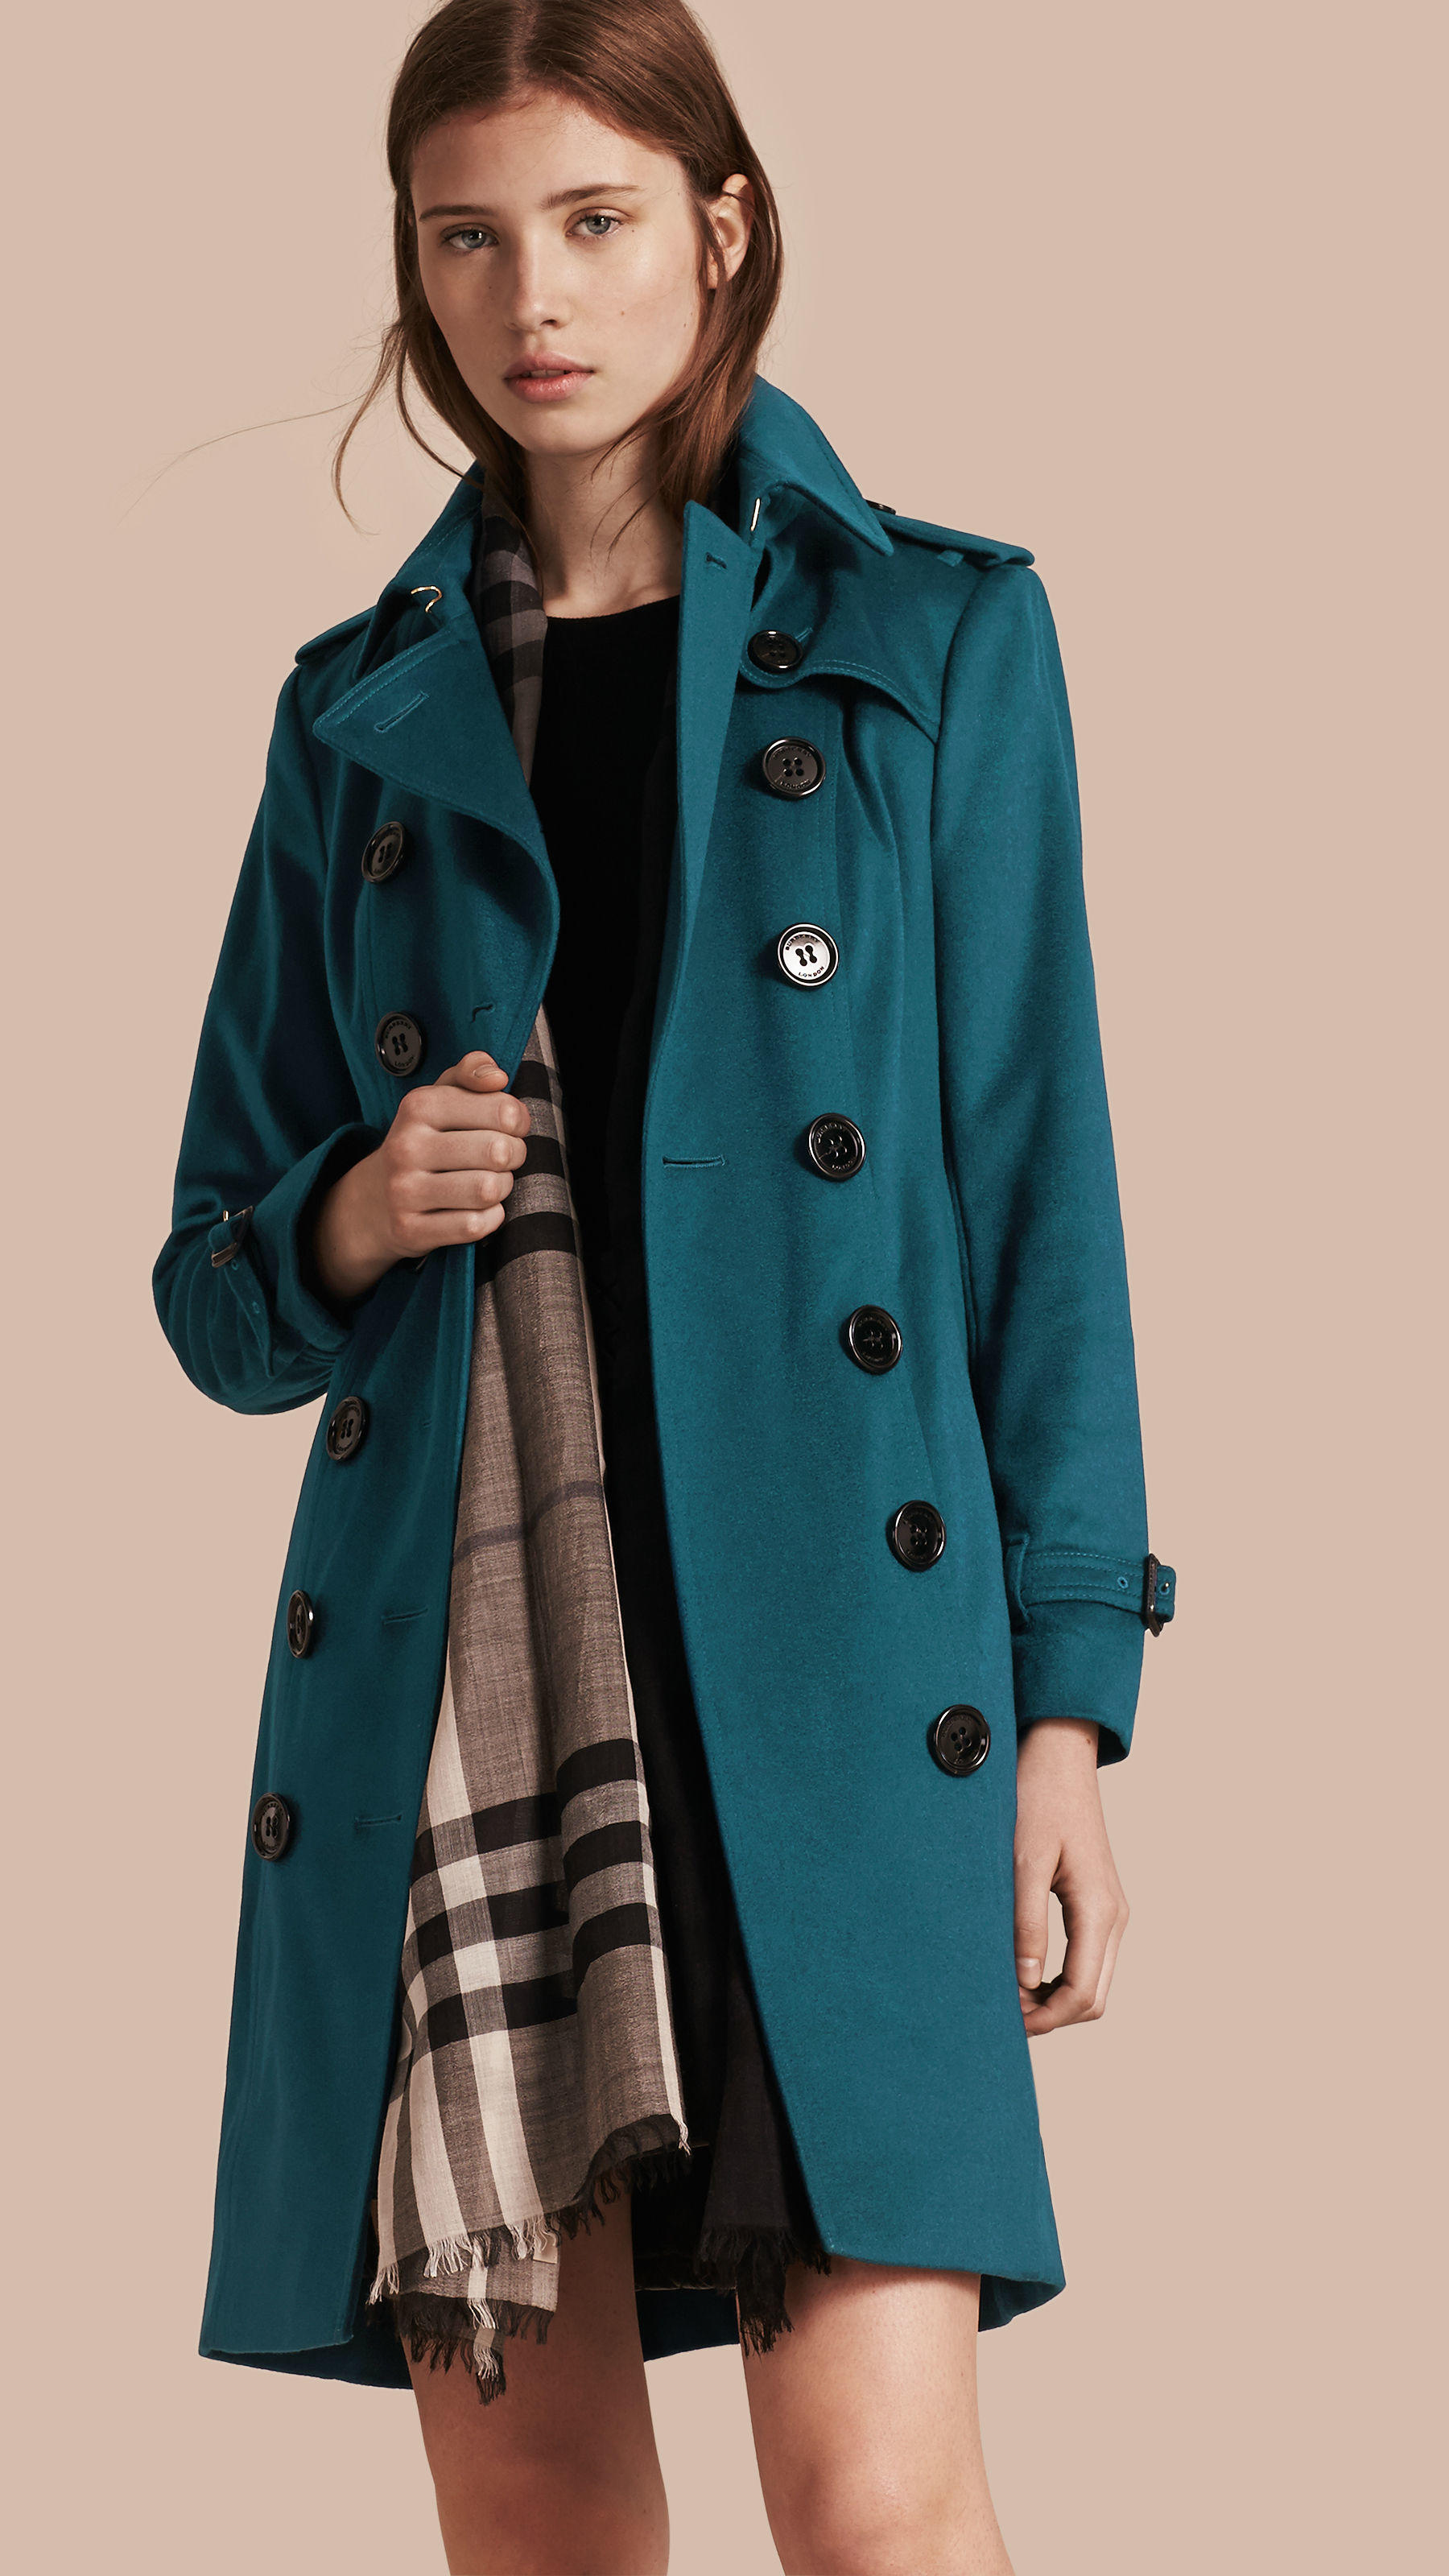 Burberry Cashmere Trench Coat in Teal 